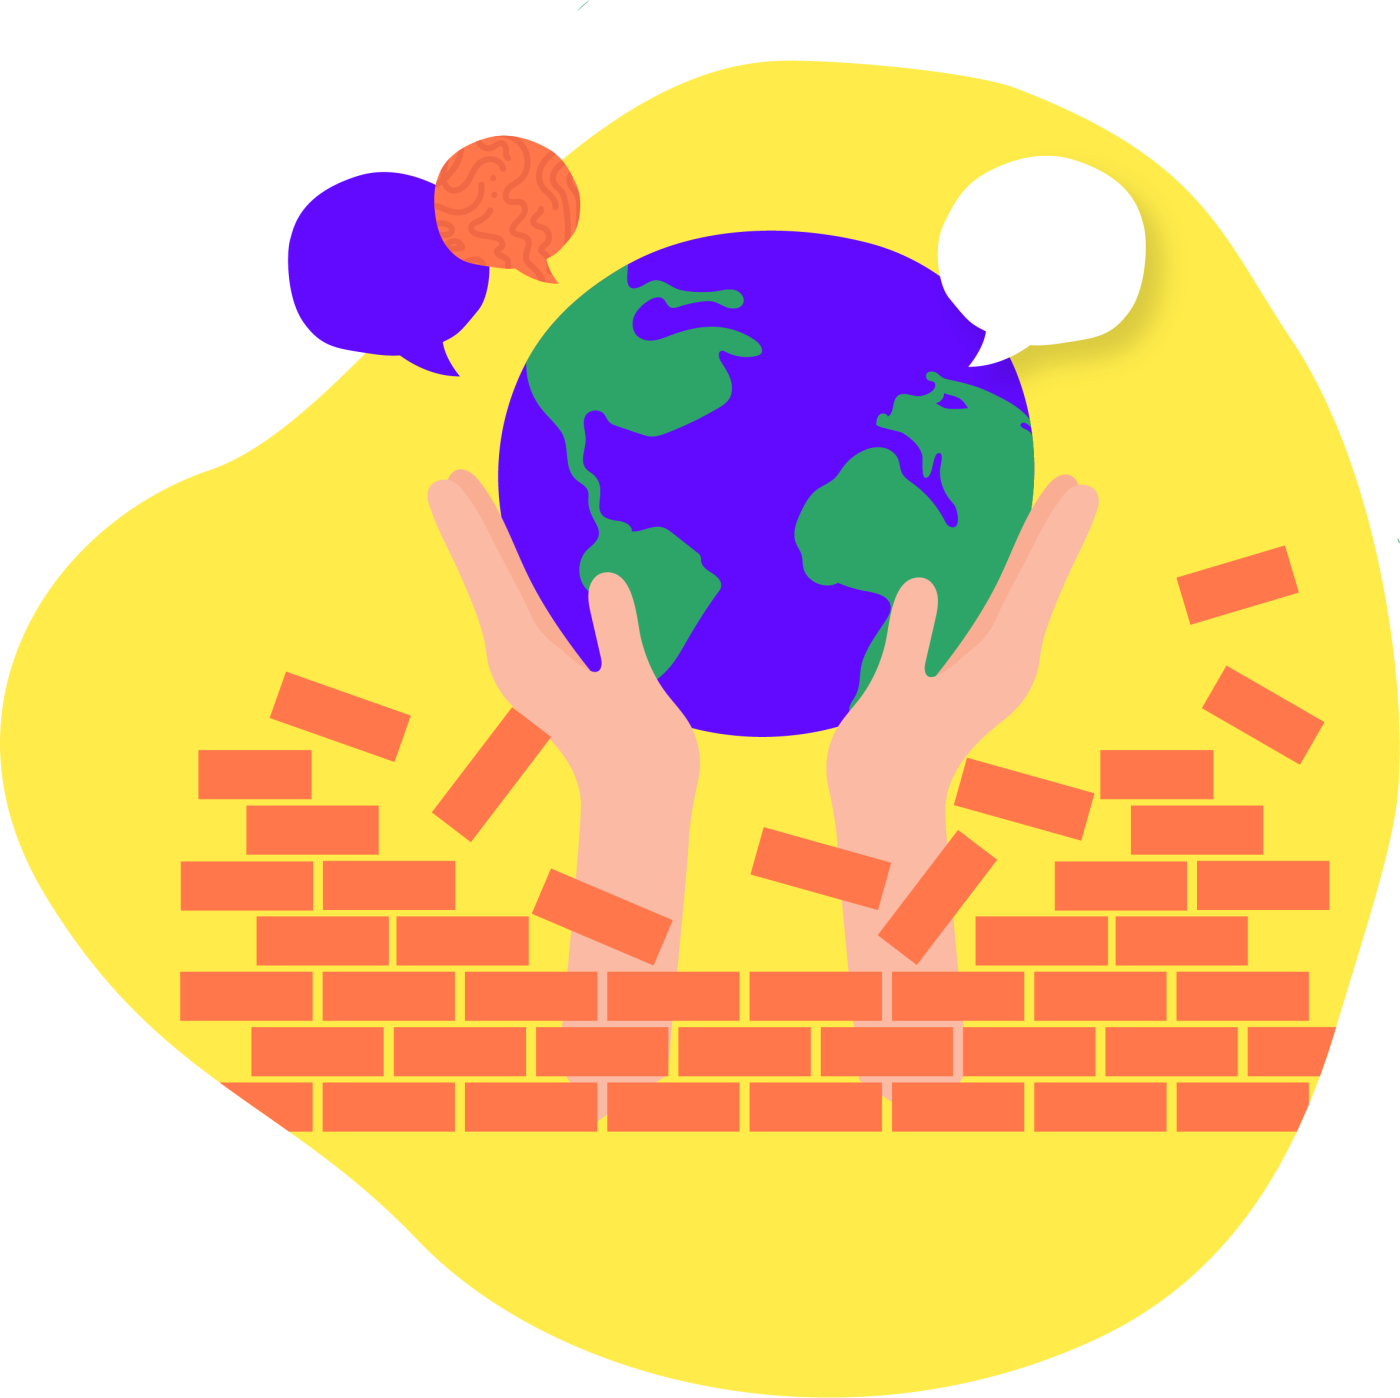 Two hands burst upwards through a brick wall, holding a purple and green globe of the earth with three speech bubbles coming out of the globe.